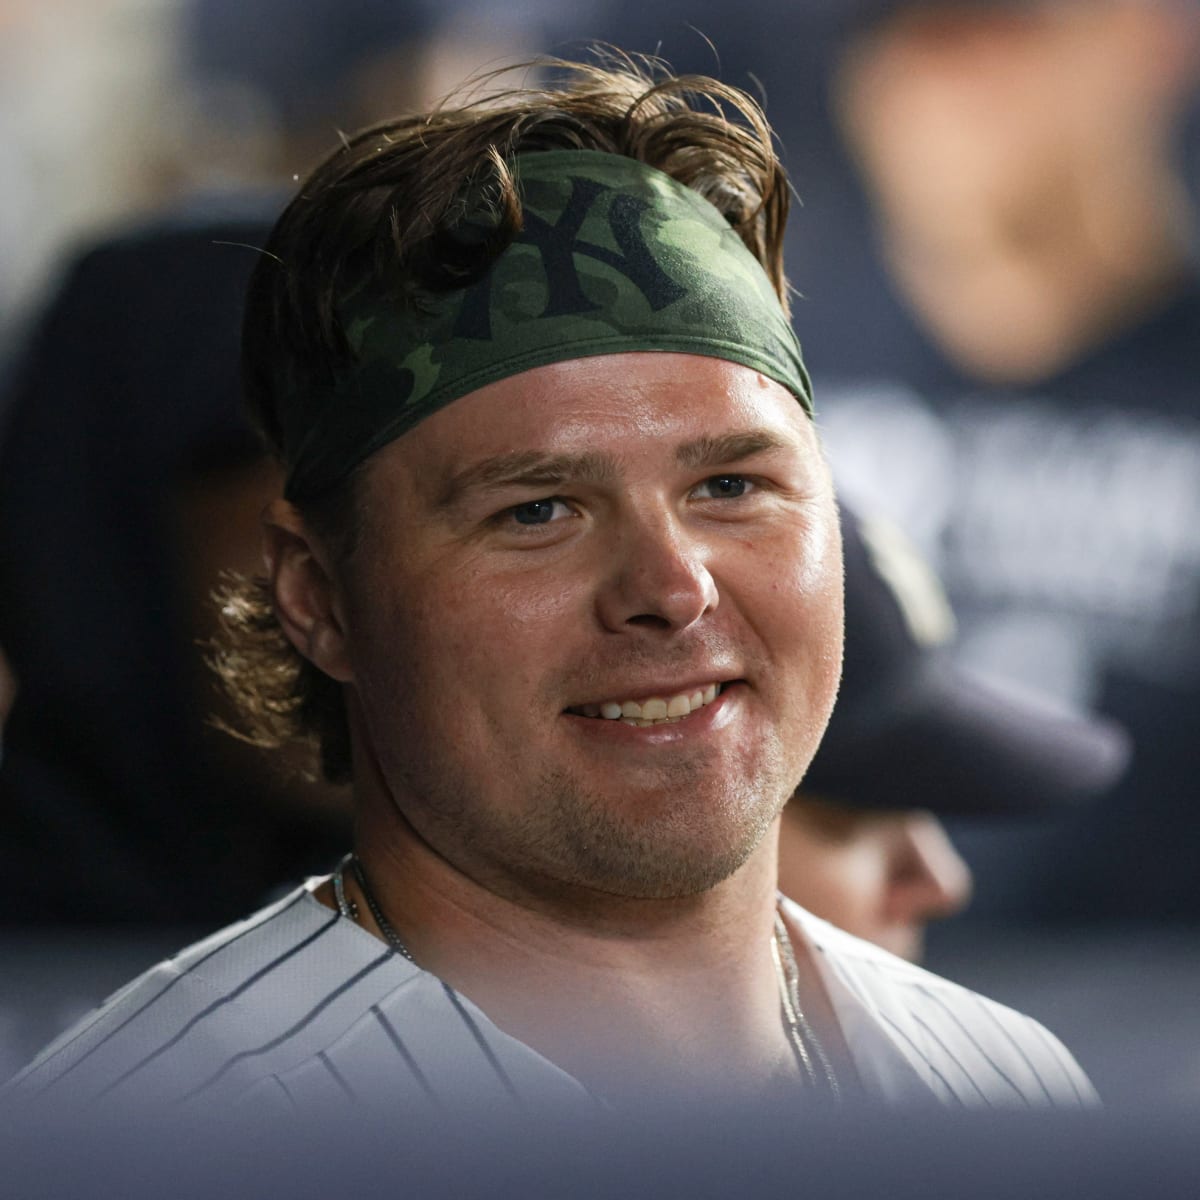 New York Yankees Luke Voit set to return from injured list - Sports  Illustrated NY Yankees News, Analysis and More